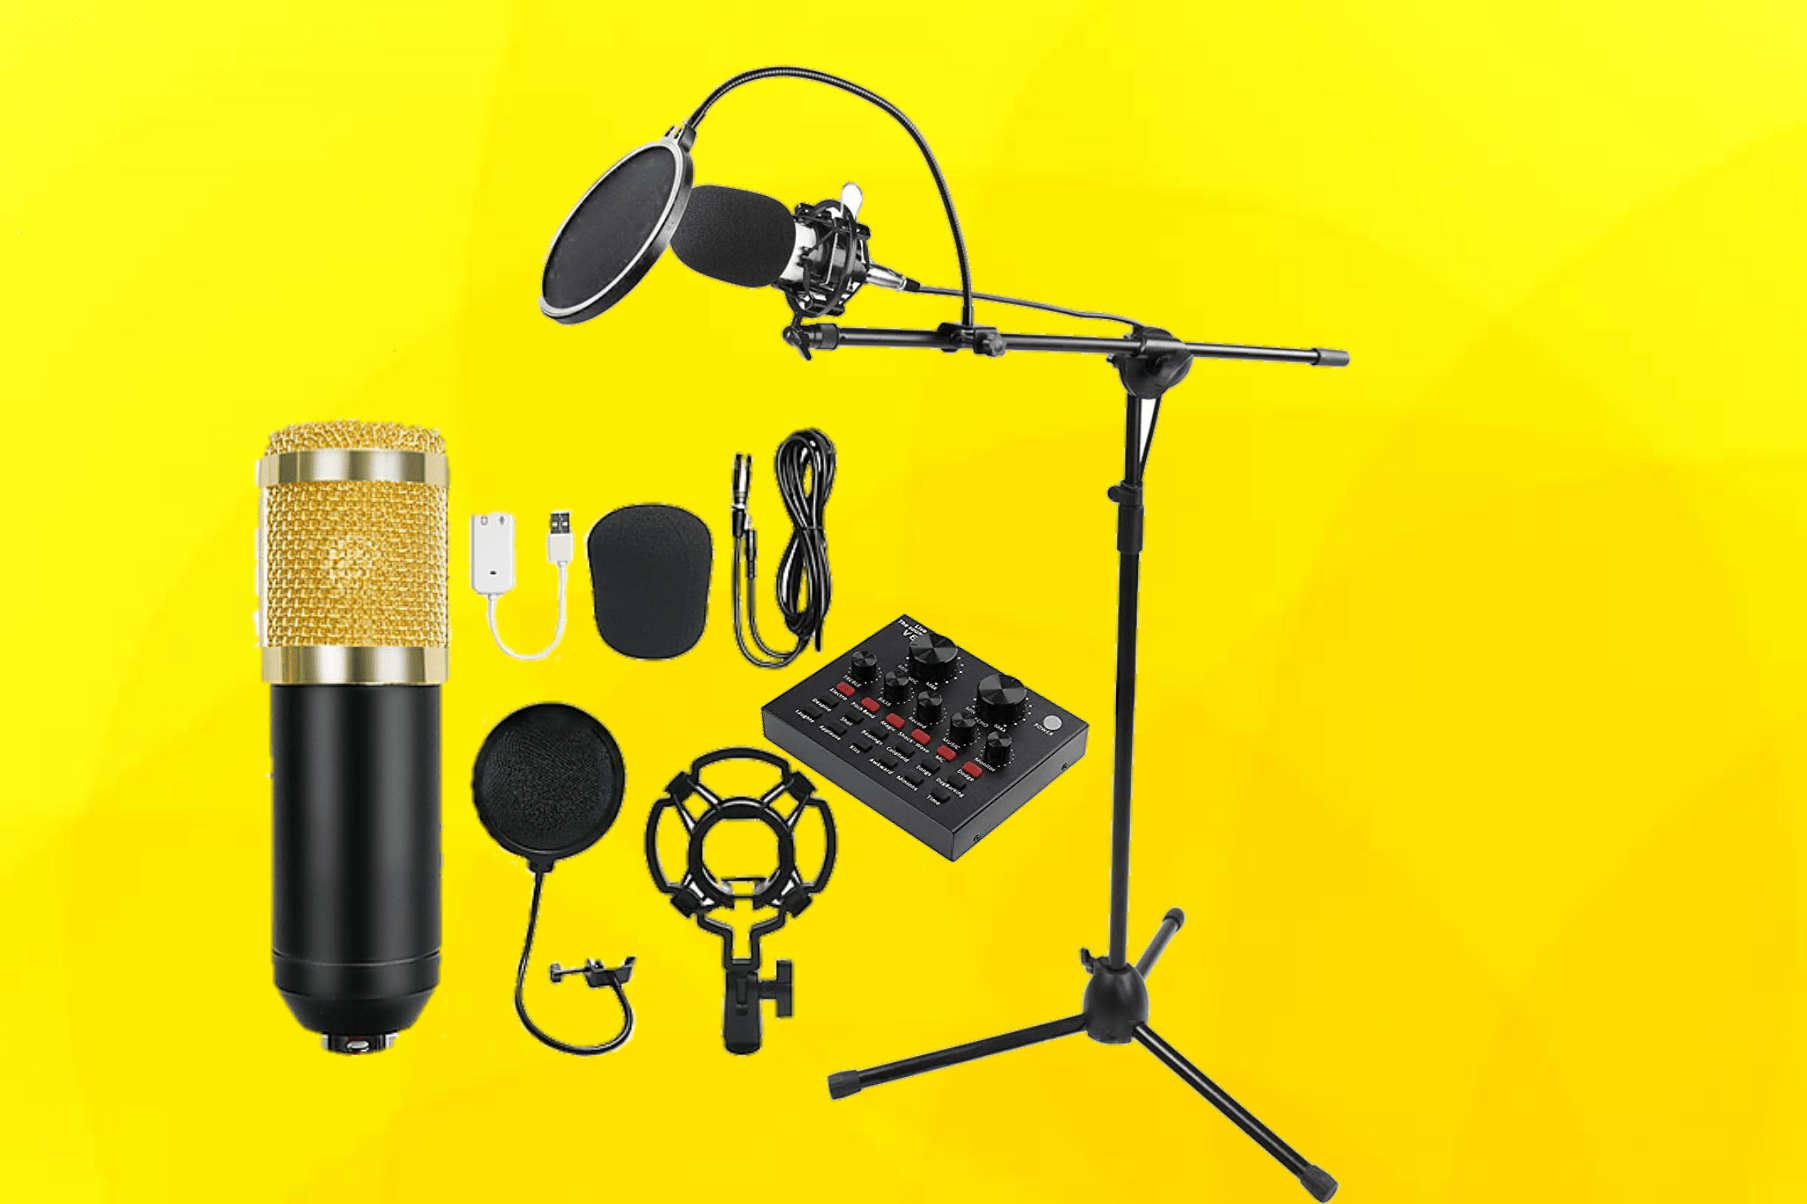 BM800 Condenser Microphone at the best Price in Bangladesh